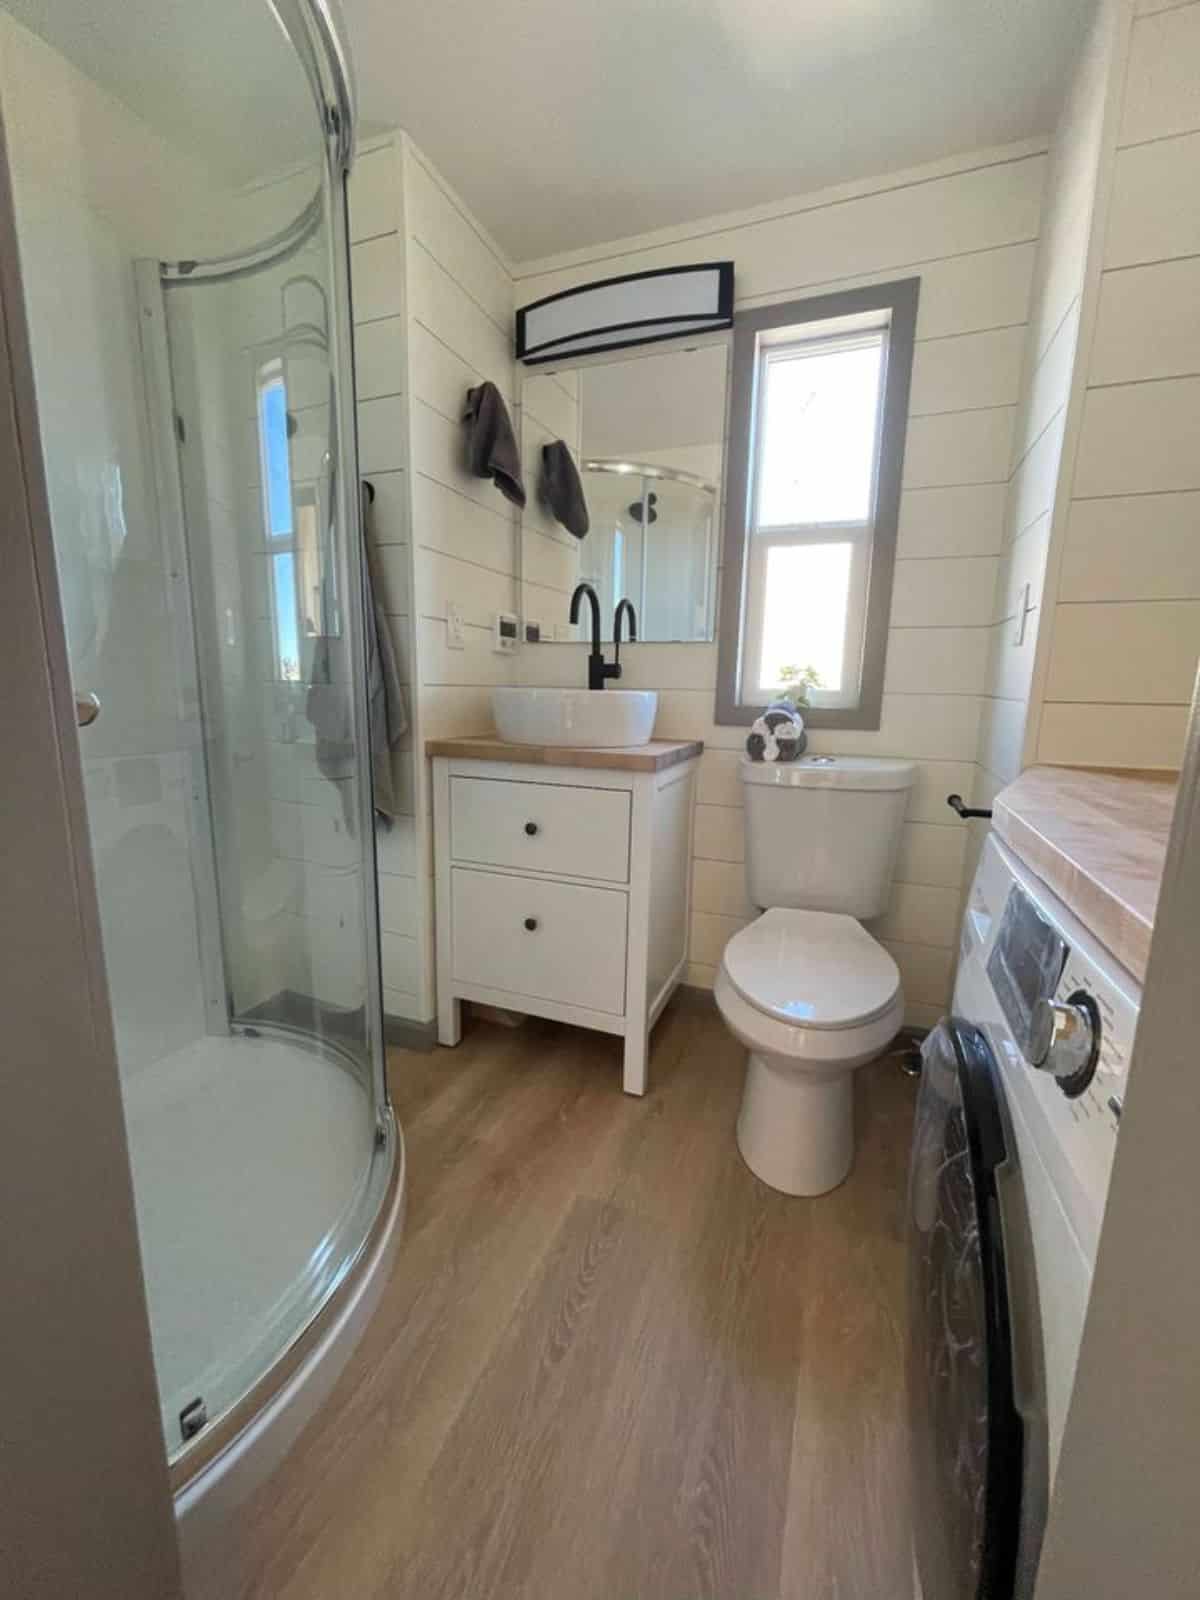 Sink with vanity & mirror, standard toilet and separate shower area